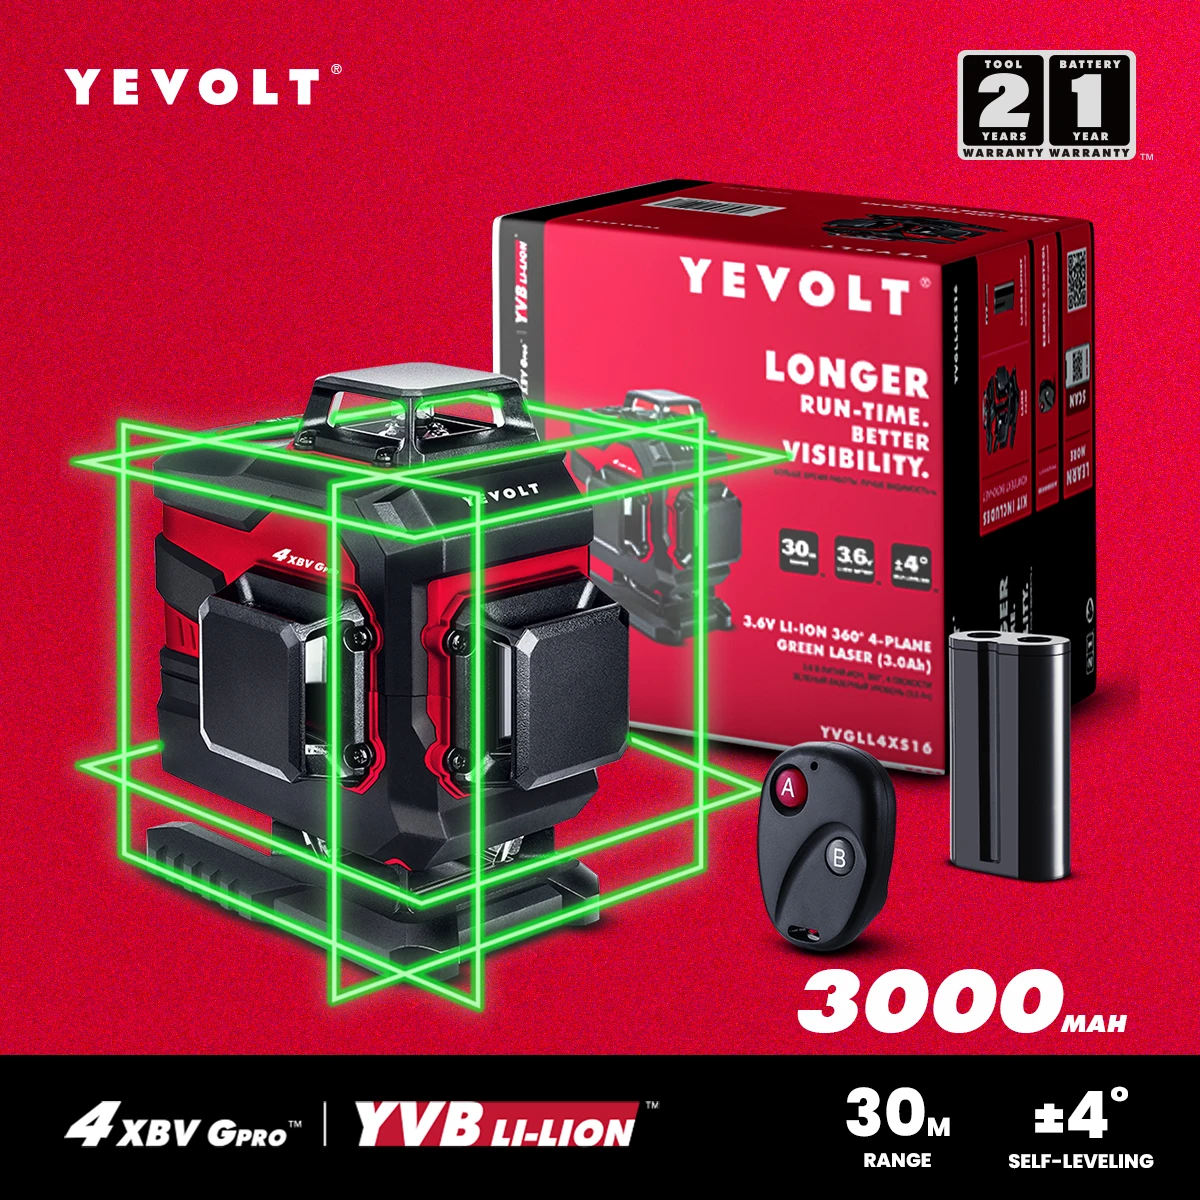 

YEVOLT YVGLL4XS16 16 Lines 4-Plane Green Laser Level Tools 4D with 3000mAh Power Self-Leveling Machine Horizontal & Vertical